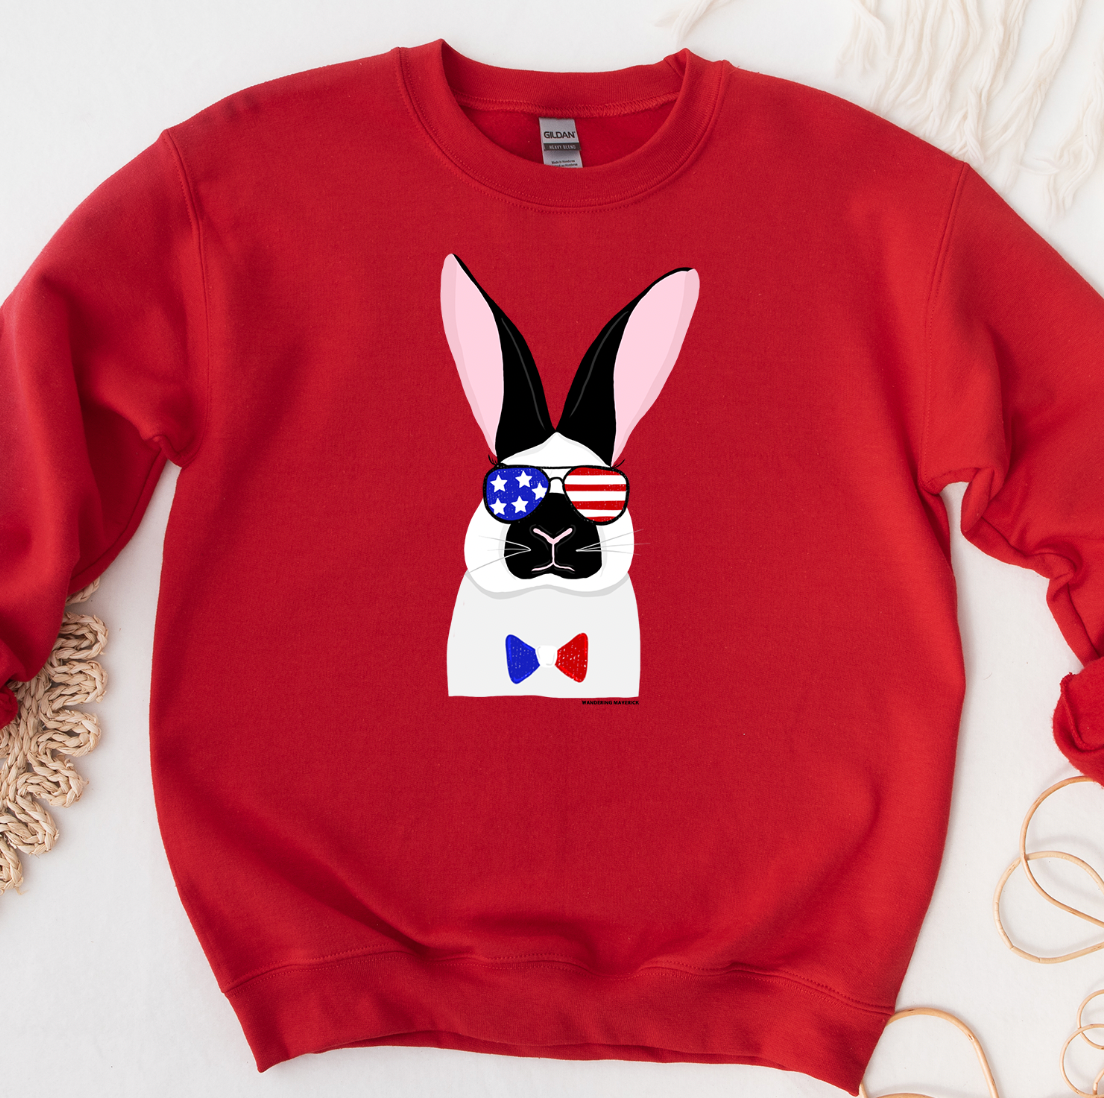 Red White and Blue Rabbit Crewneck (S-3XL) - Multiple Colors!